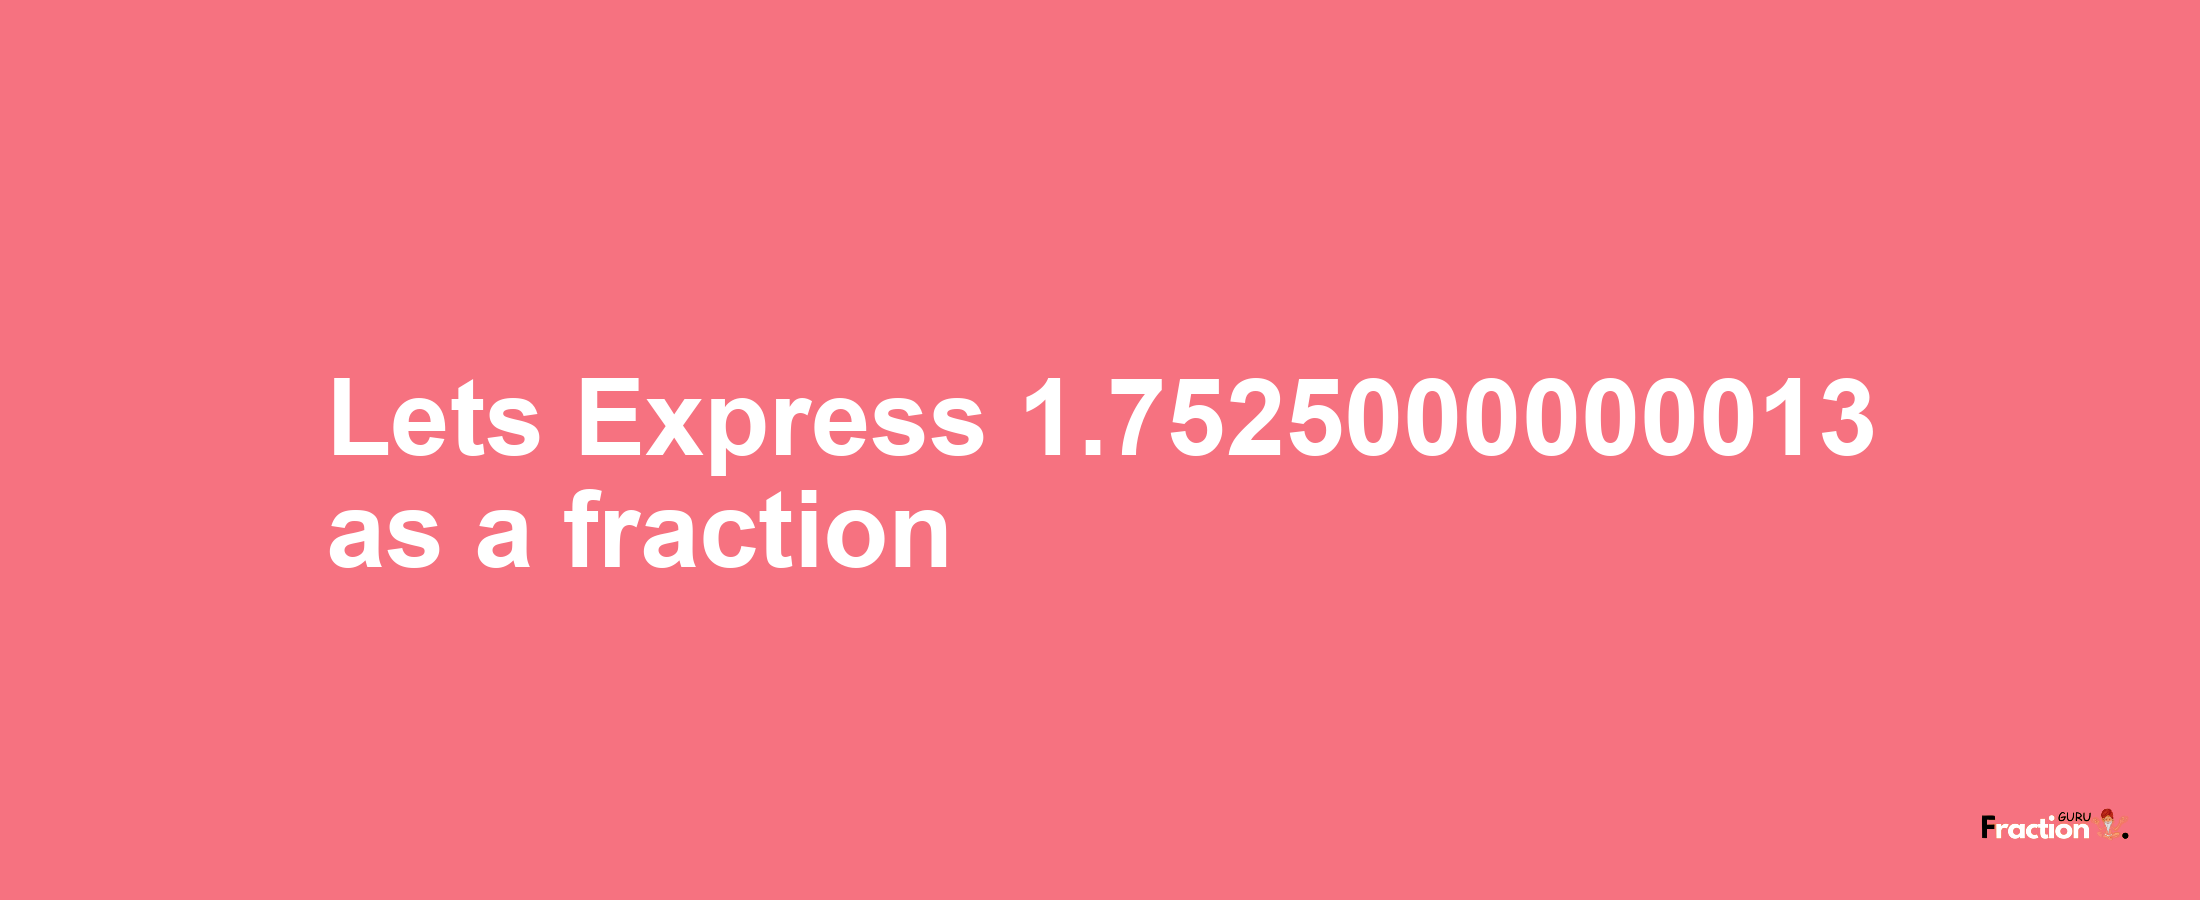 Lets Express 1.7525000000013 as afraction